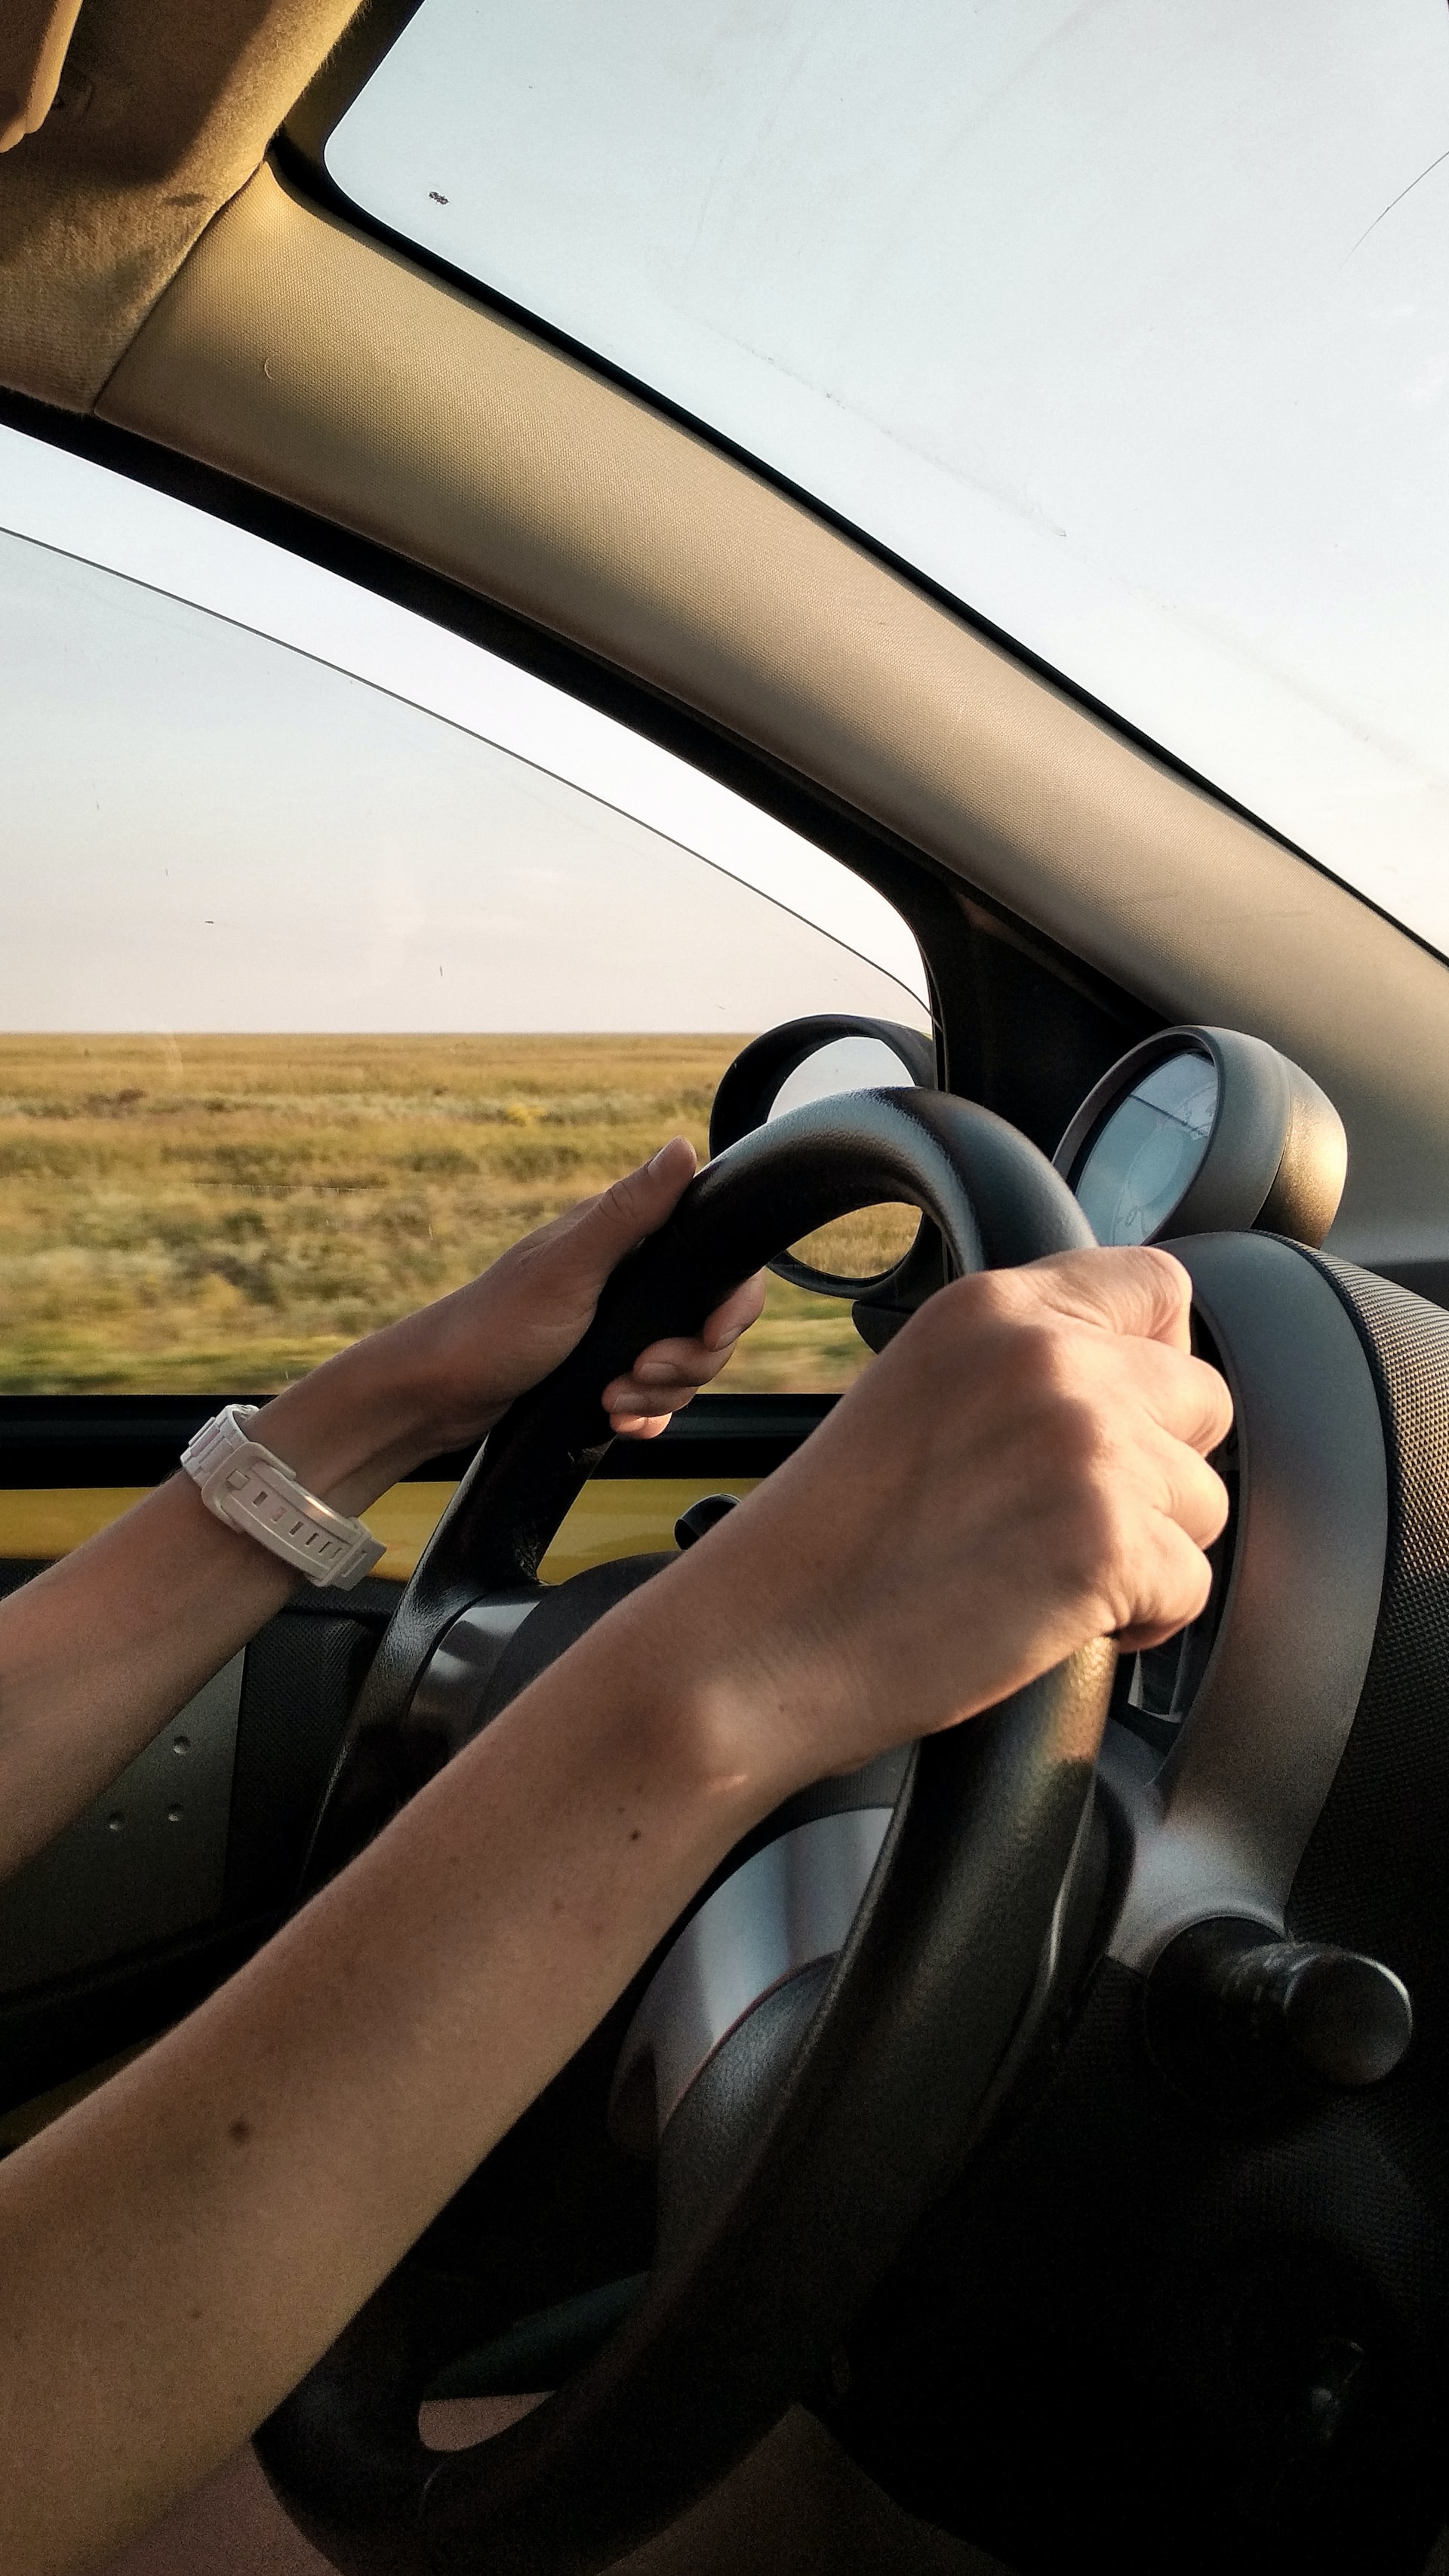 Why Is Defensive Driving So Important?